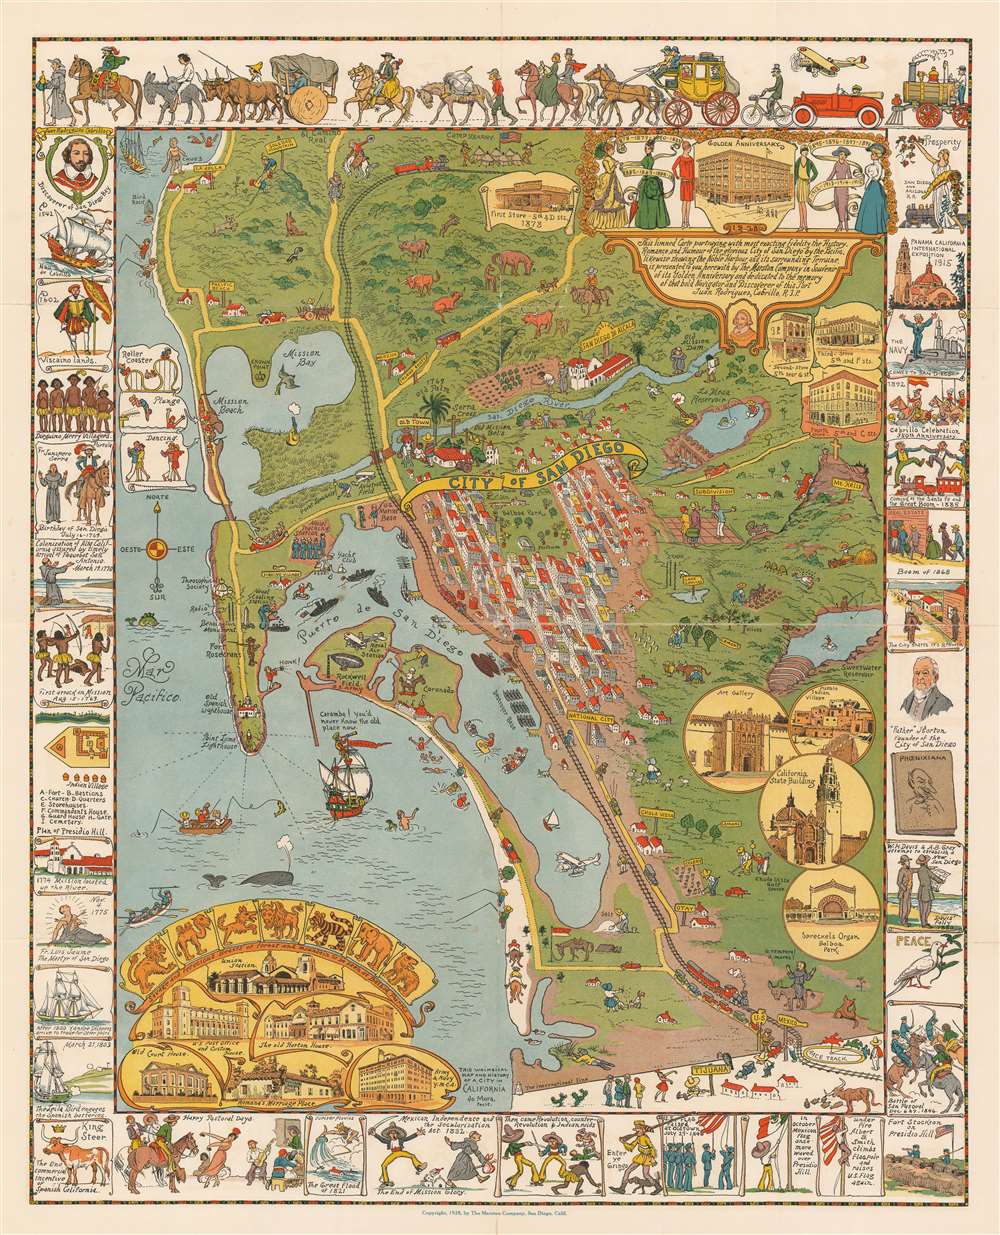 This limned Carte protraying with most exacting fidelity the History, Romance, and Humor of the glorious City of San Diego by the Pacific… - Main View